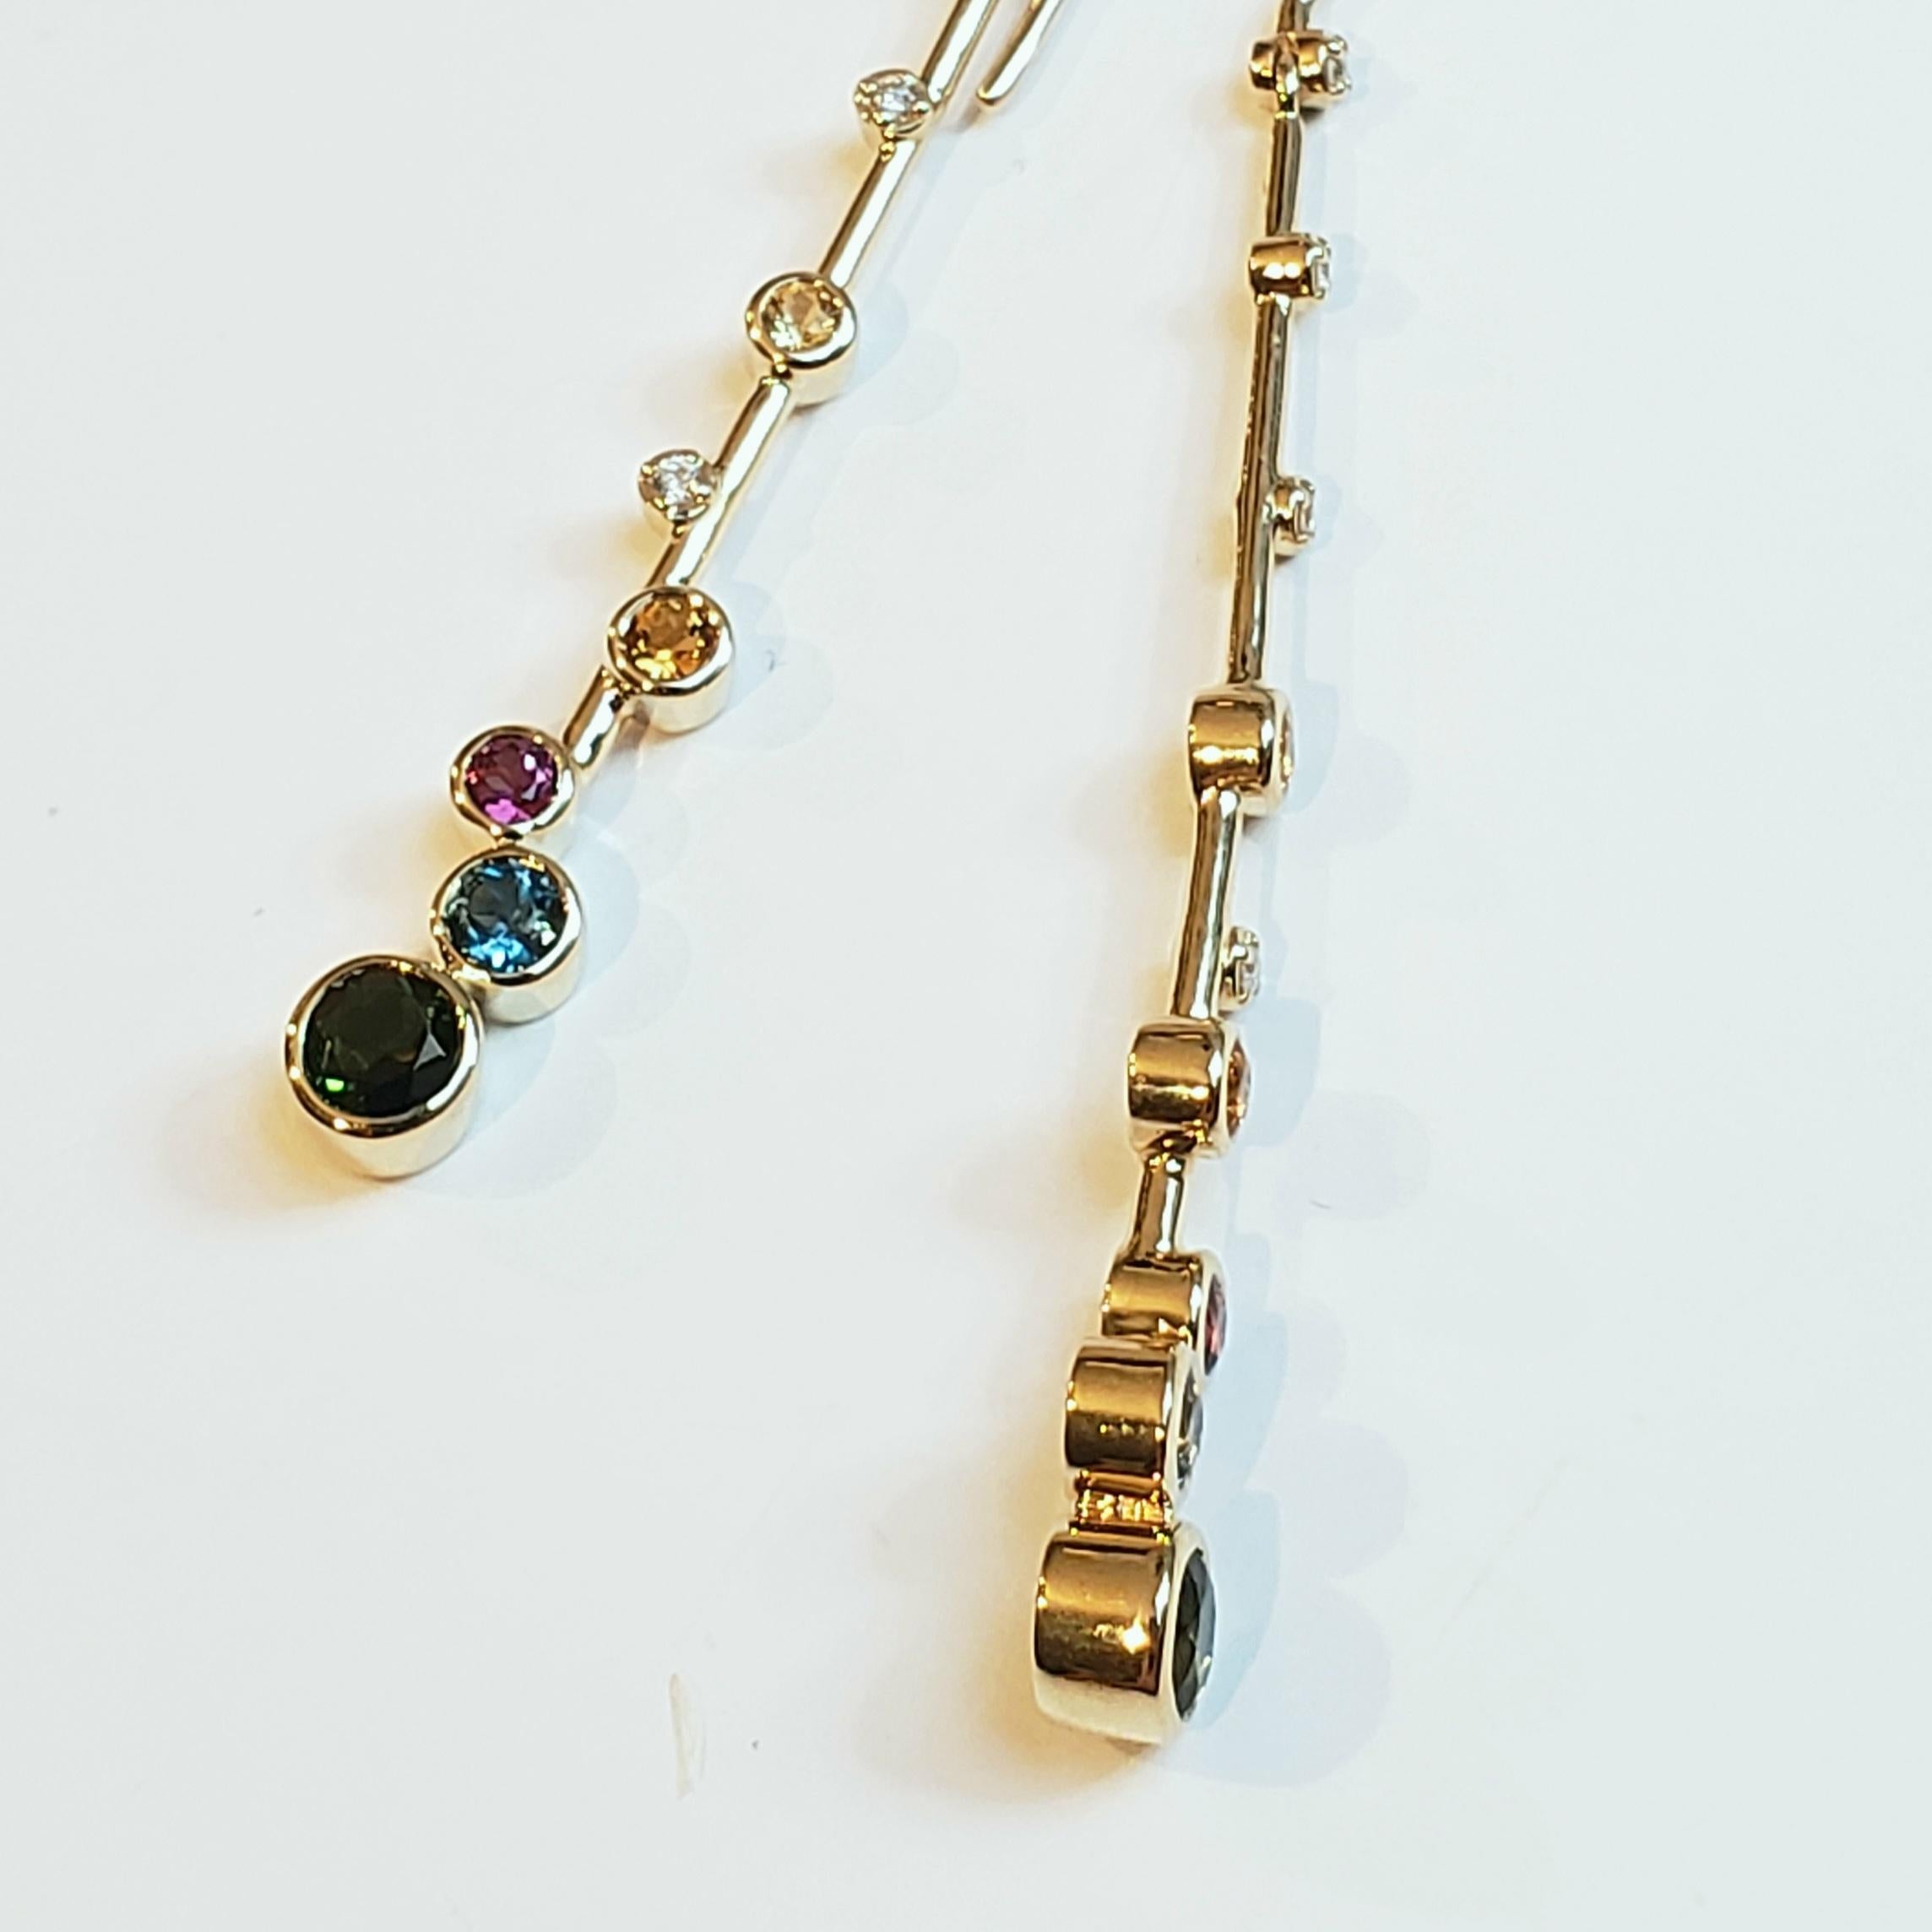 Contemporary Elongated Multi-Color Gemstone Constellation Earrings in 14k Gold with Diamonds